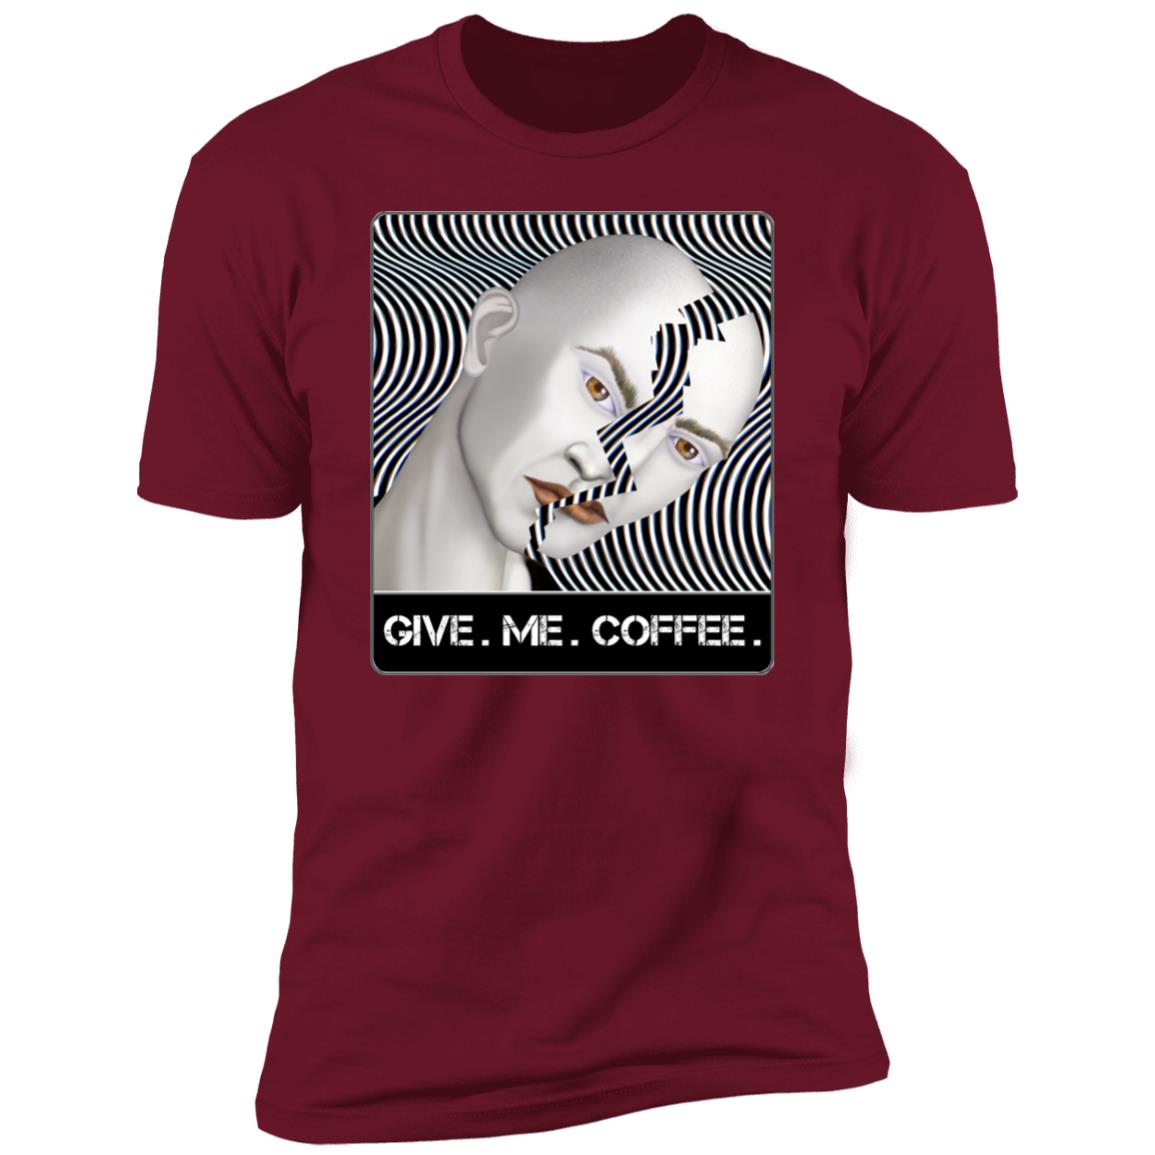 GIVE. ME. COFFEE. - Men's Premium Fitted T-Shirt